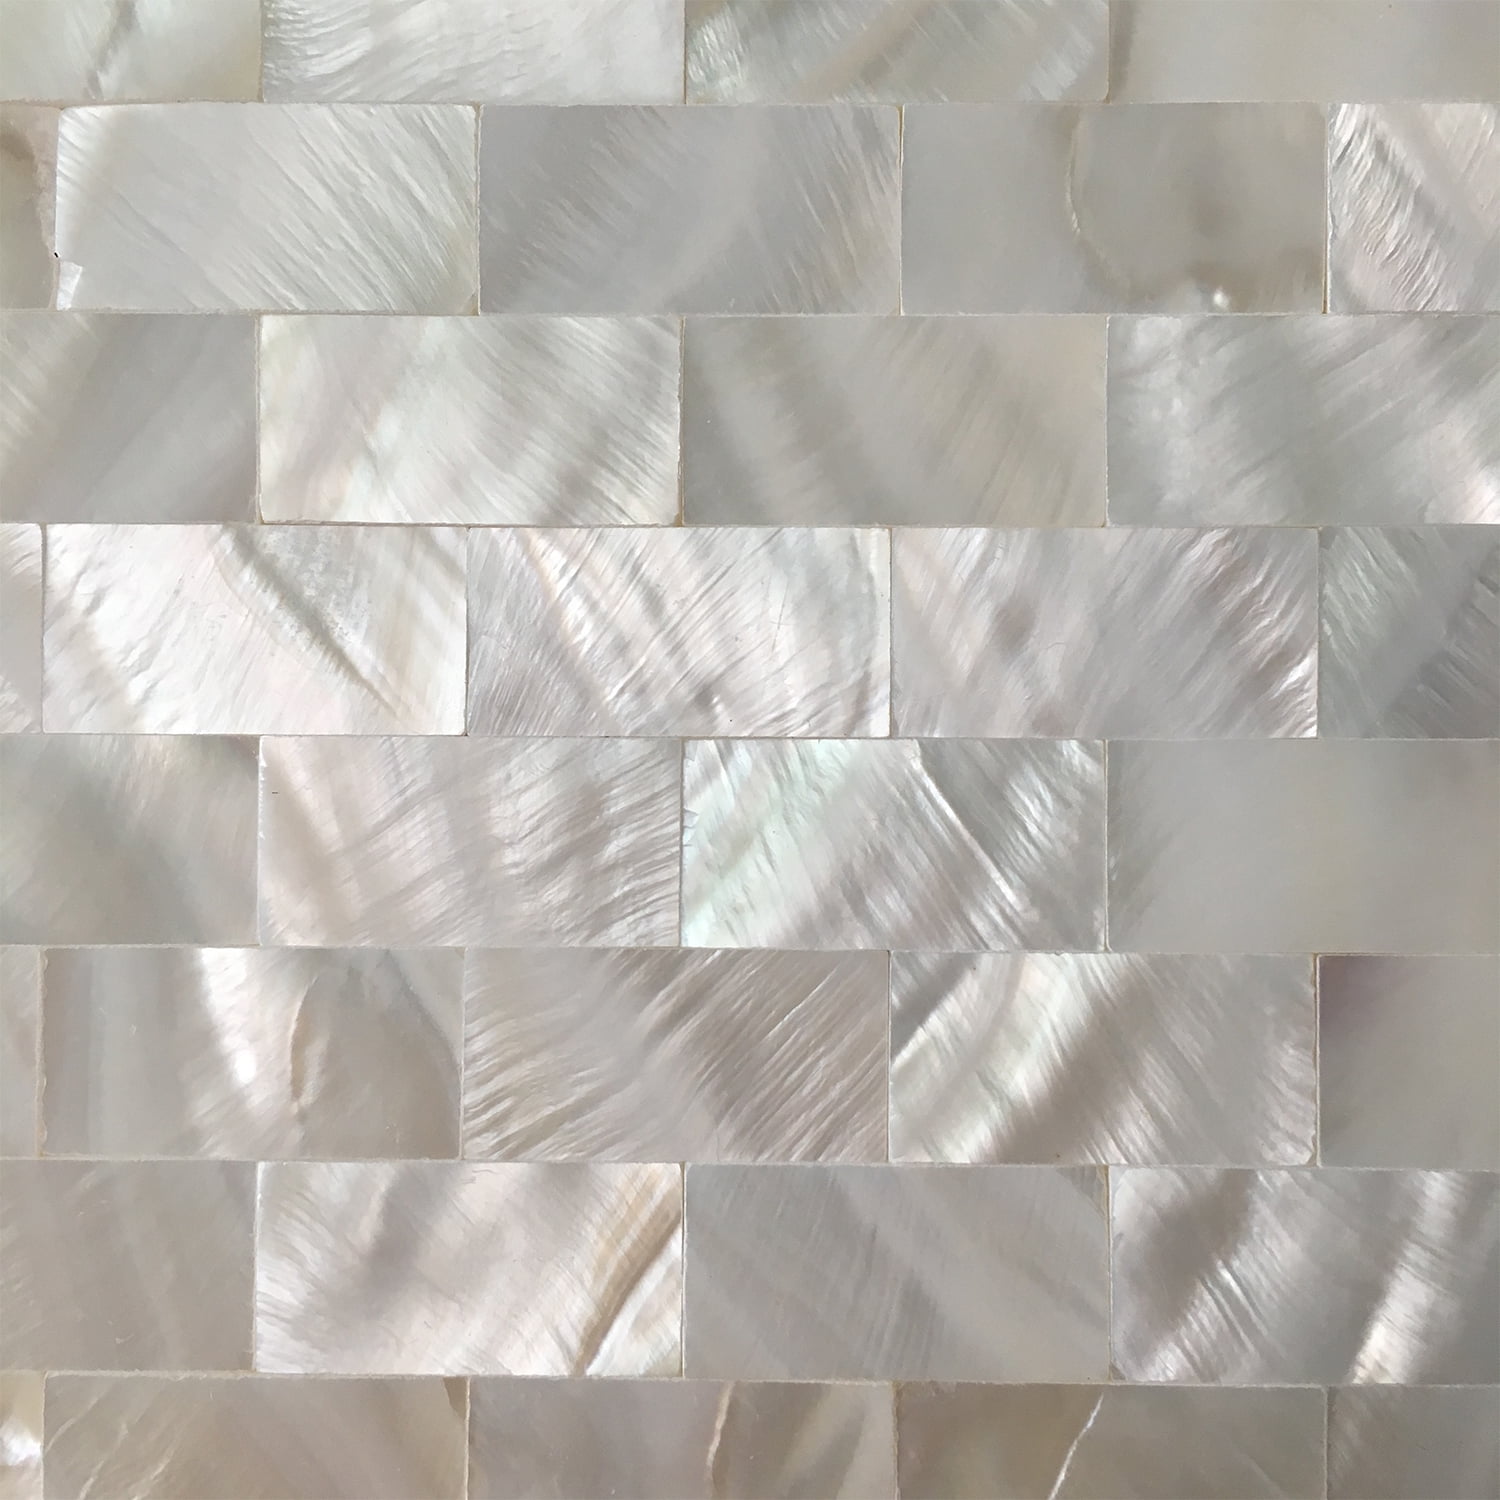 12 x 12 White Brick Art3d 6-Pack Peel and Stick Mother of Pearl Shell Tile for Kitchen Backsplashes